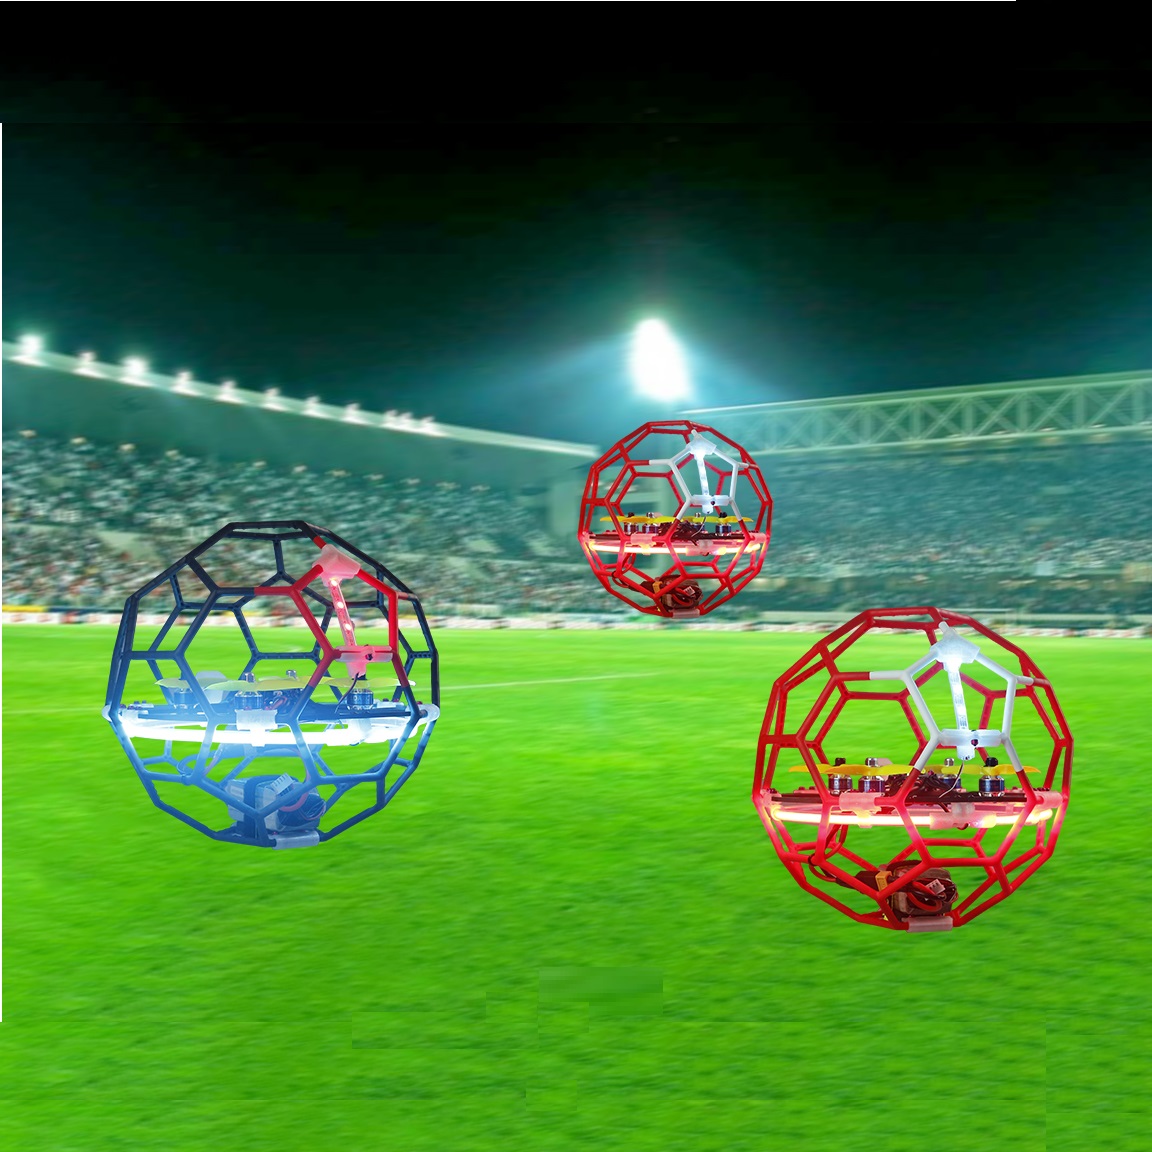 LDARC FLYBALL 230 Soccer drone, 4S power,combines drones with soccer - LDARC